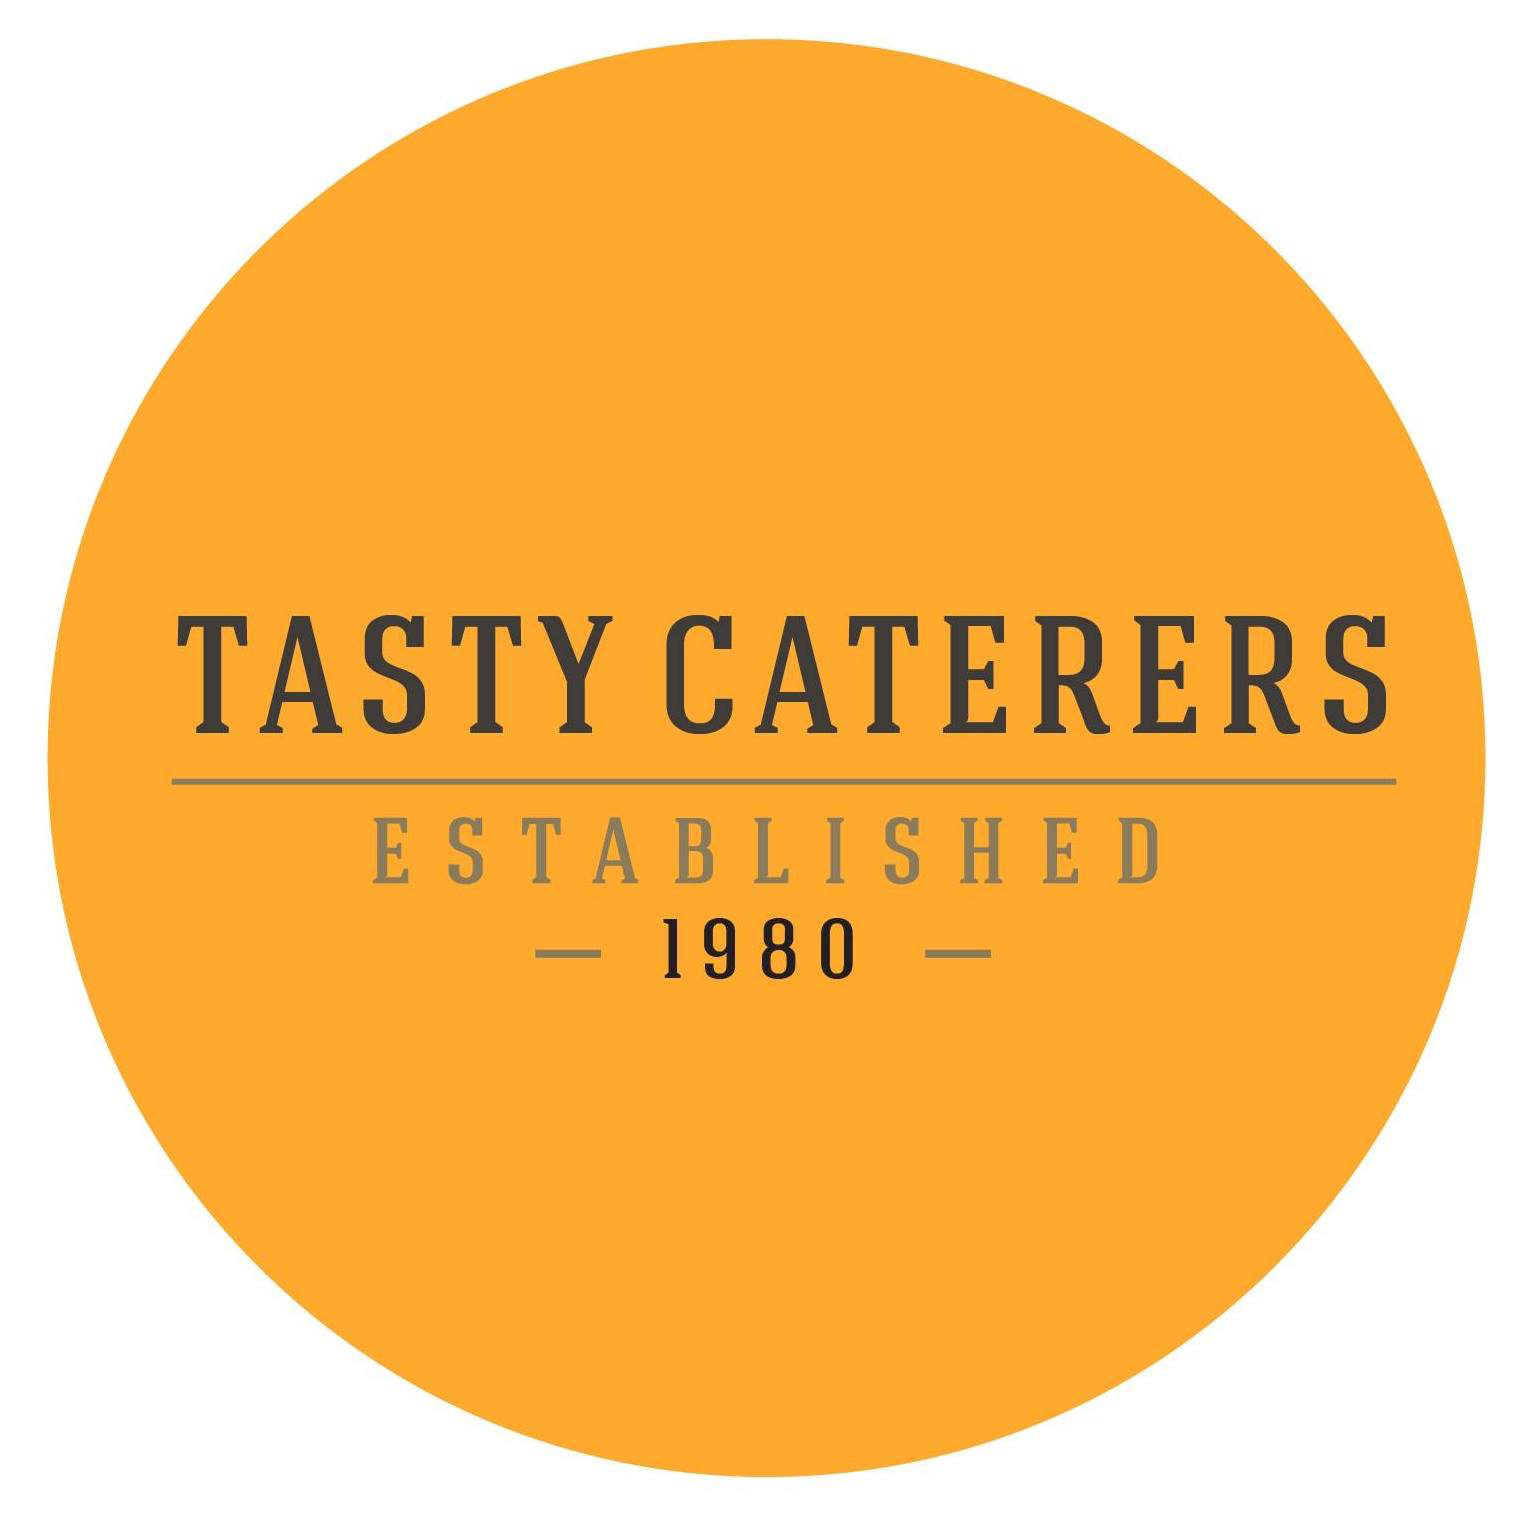 Tasty Caterers